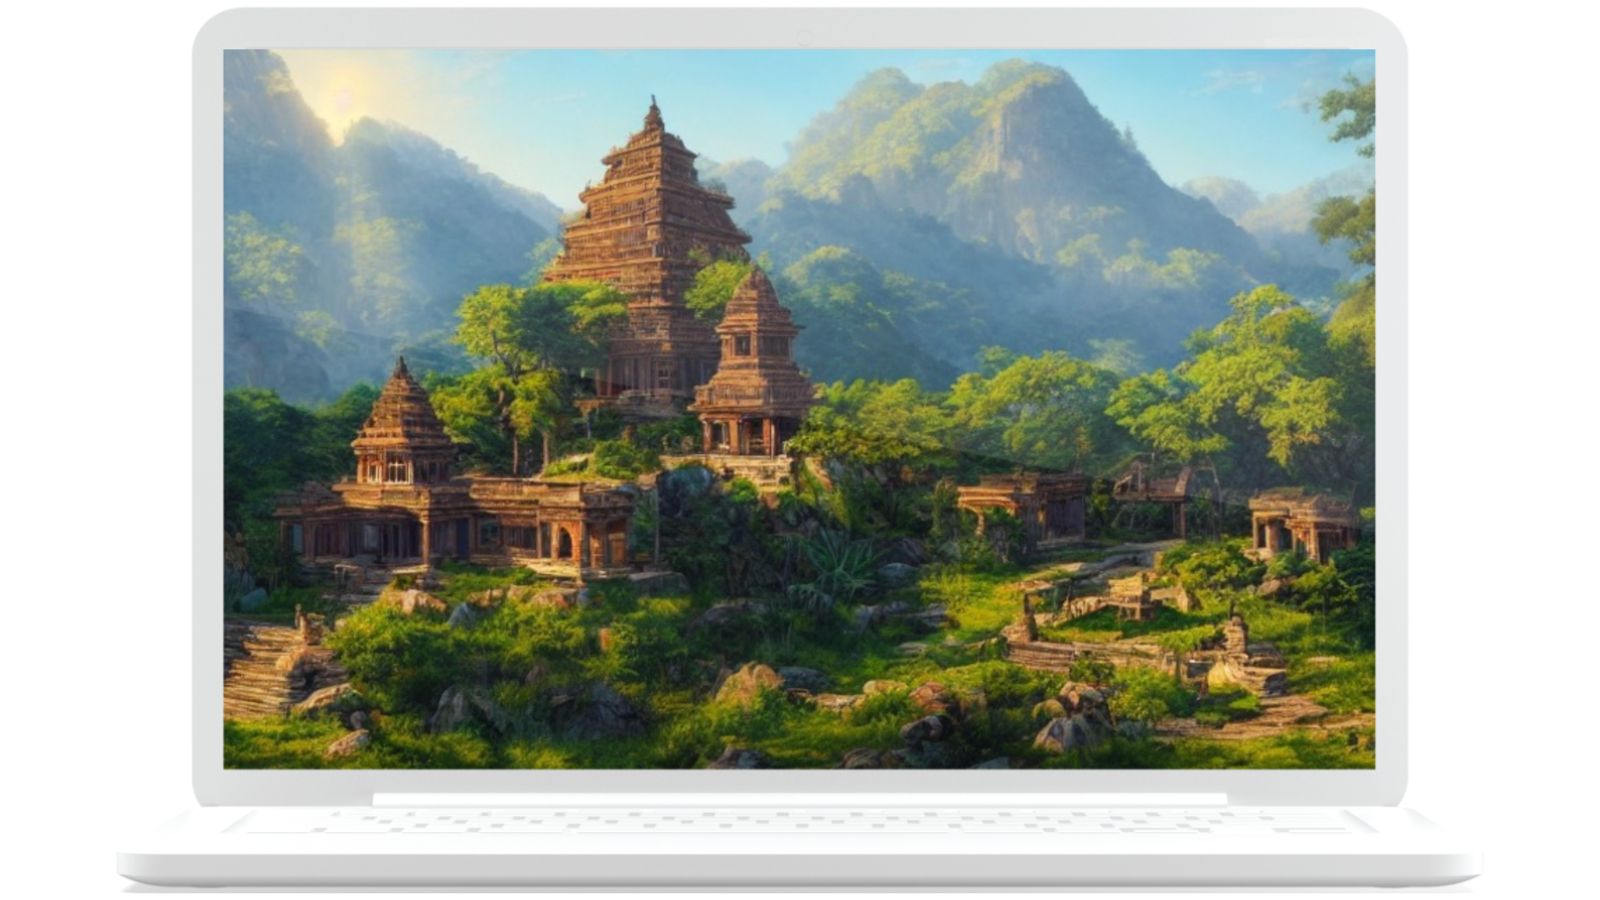 Laptop with desktop image of temples in the mountains | SEO & analytics